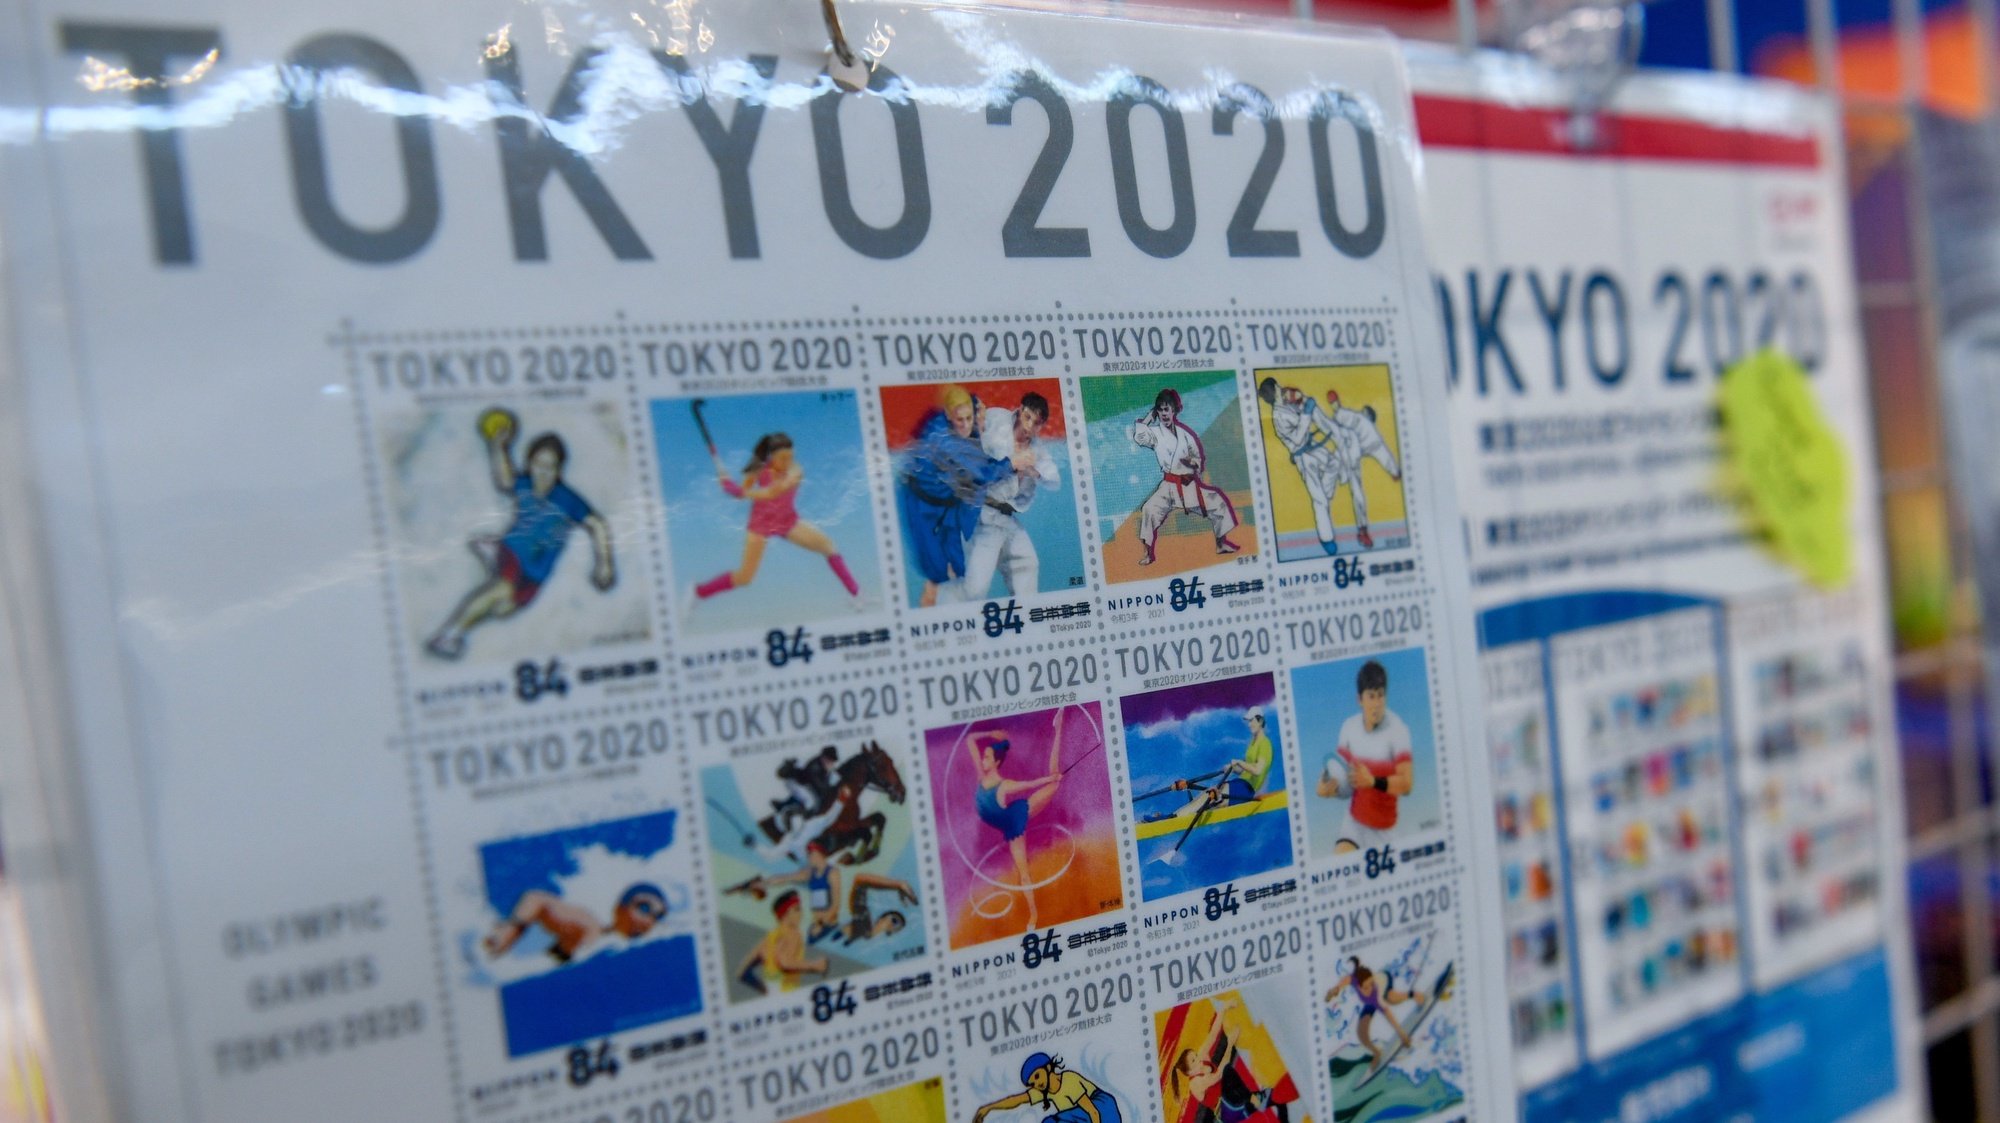 epa09356043 Olympic stamps are displayed at the Main Press Center in Tokyo, Japan, 21 July 2021. The pandemic-delayed 2020 Summer Olympics are schedule to open on July 23 with spectators banned from most Olympic events due to COVID-19 surge.  EPA/Zsolt Czegledi HUNGARY OUT